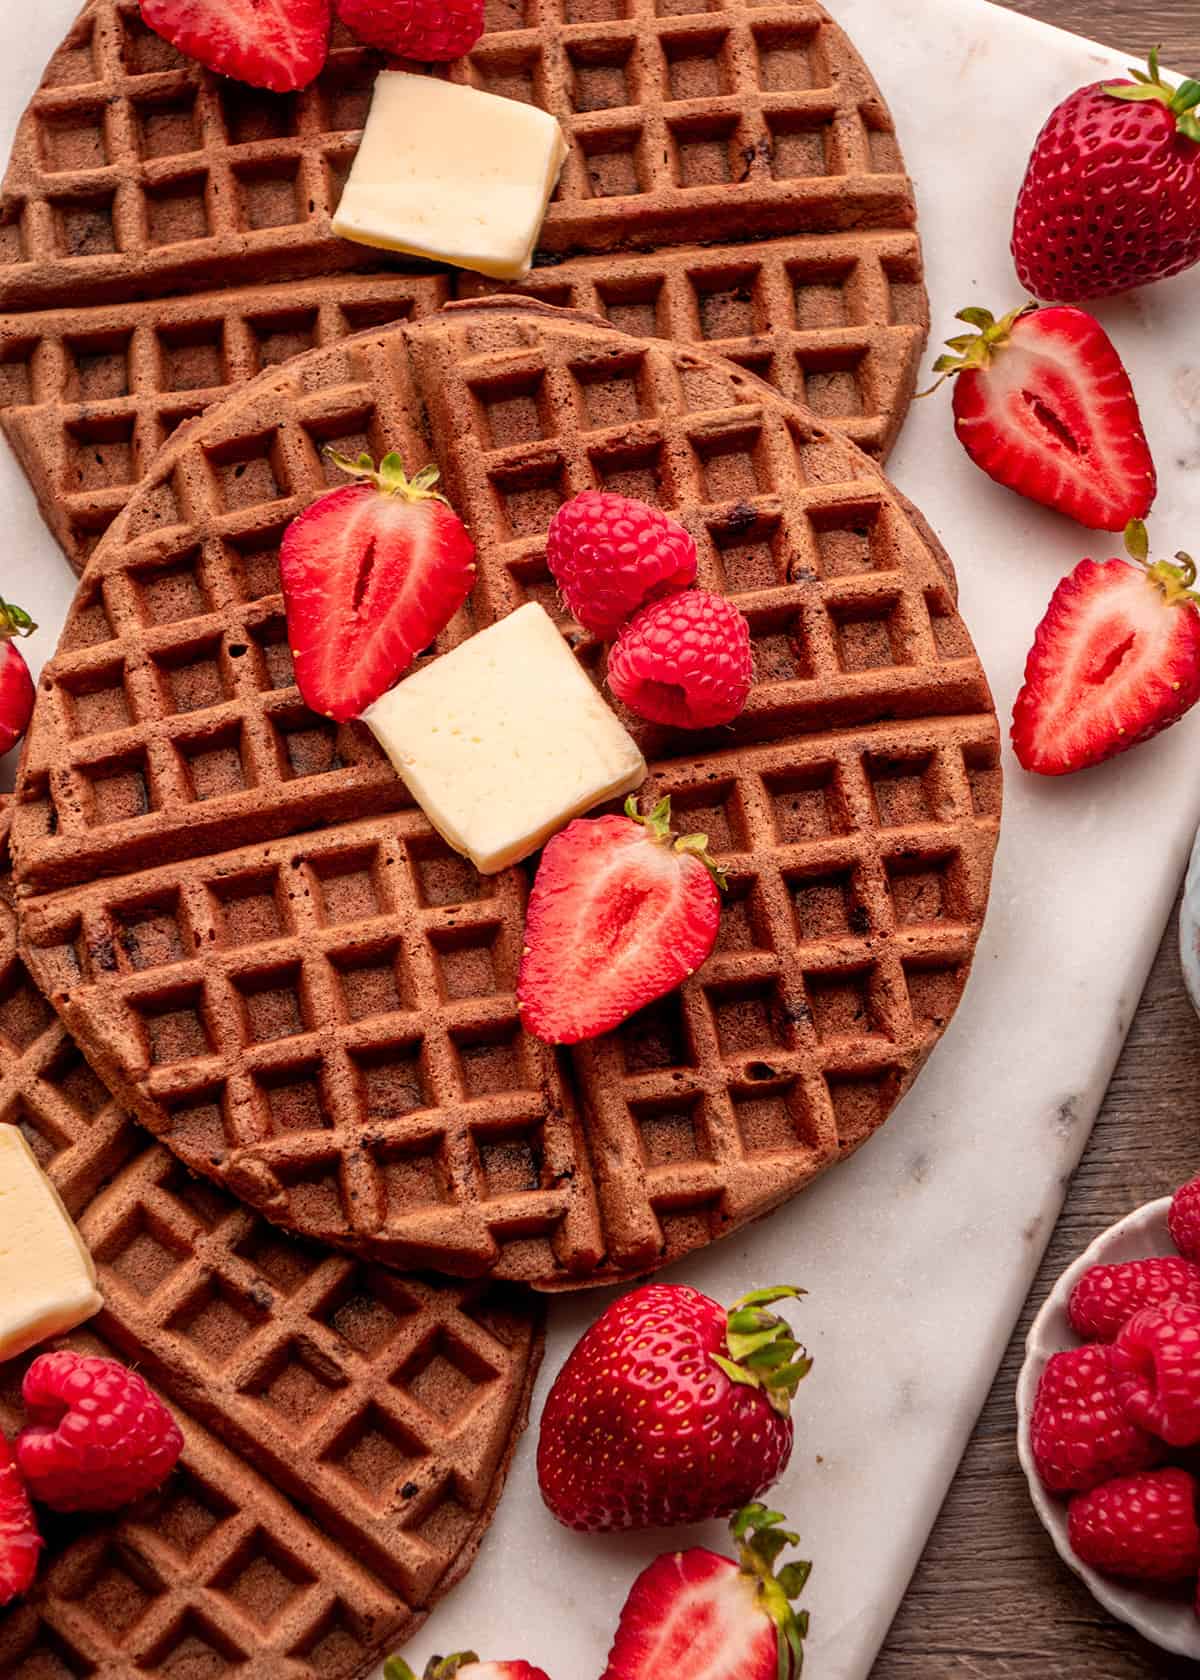 Chocolate Waffles with butter and berries